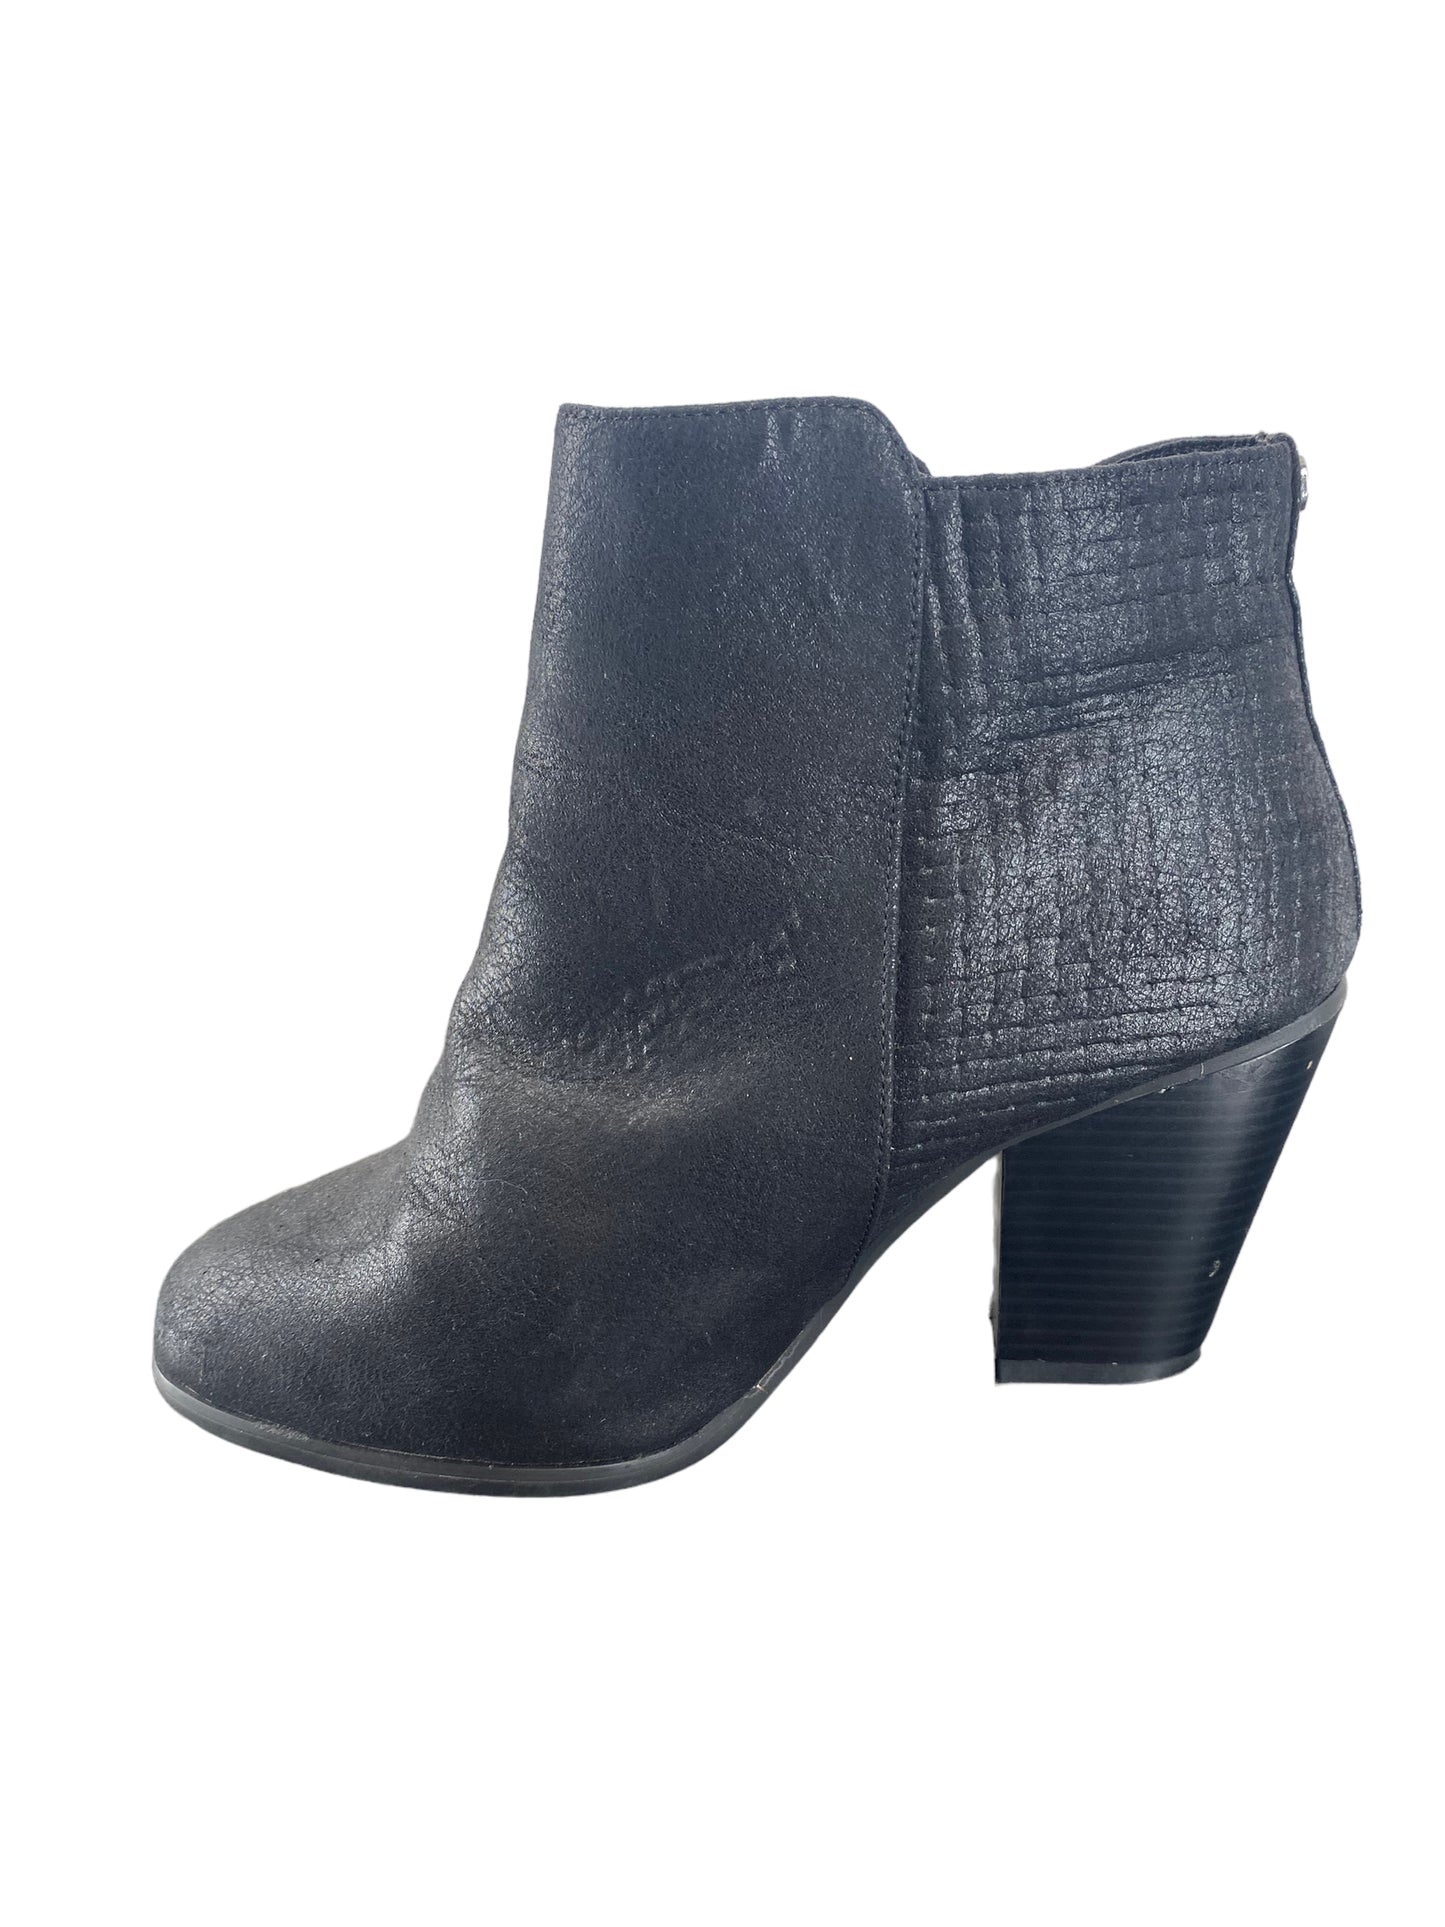 Boots Ankle Heels By Daisy Fuentes  Size: 11